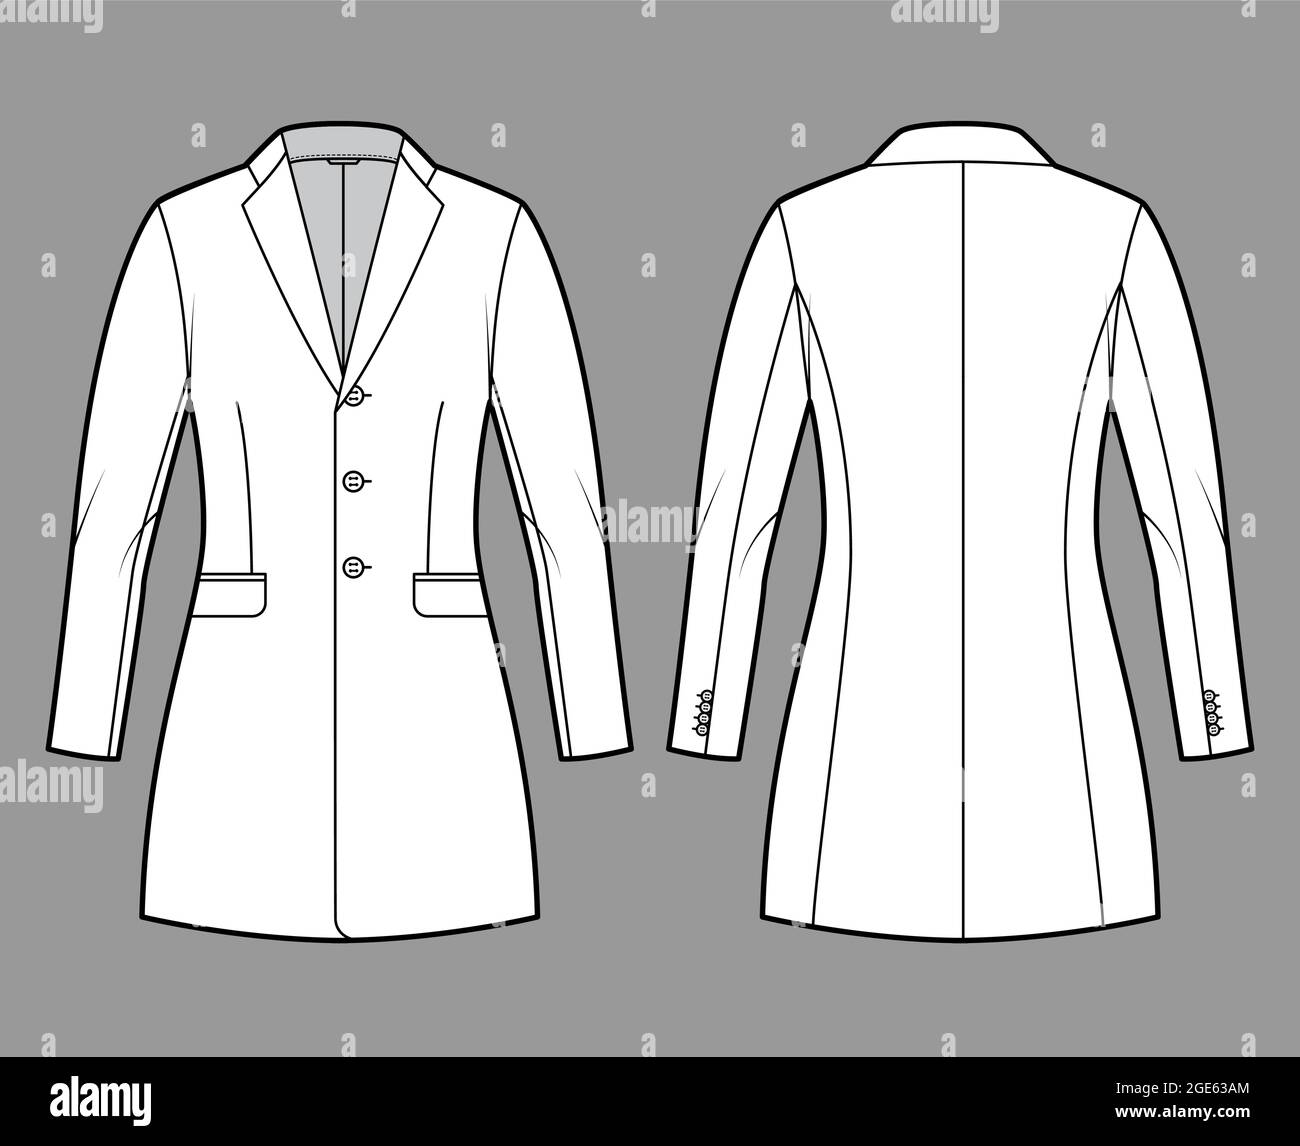 Jacket fitted Blazer structured suit technical fashion illustration with single breasted, long sleeves, flap pockets, fingertip length. Flat coat template front, back, white color. Women, men CAD Stock Vector